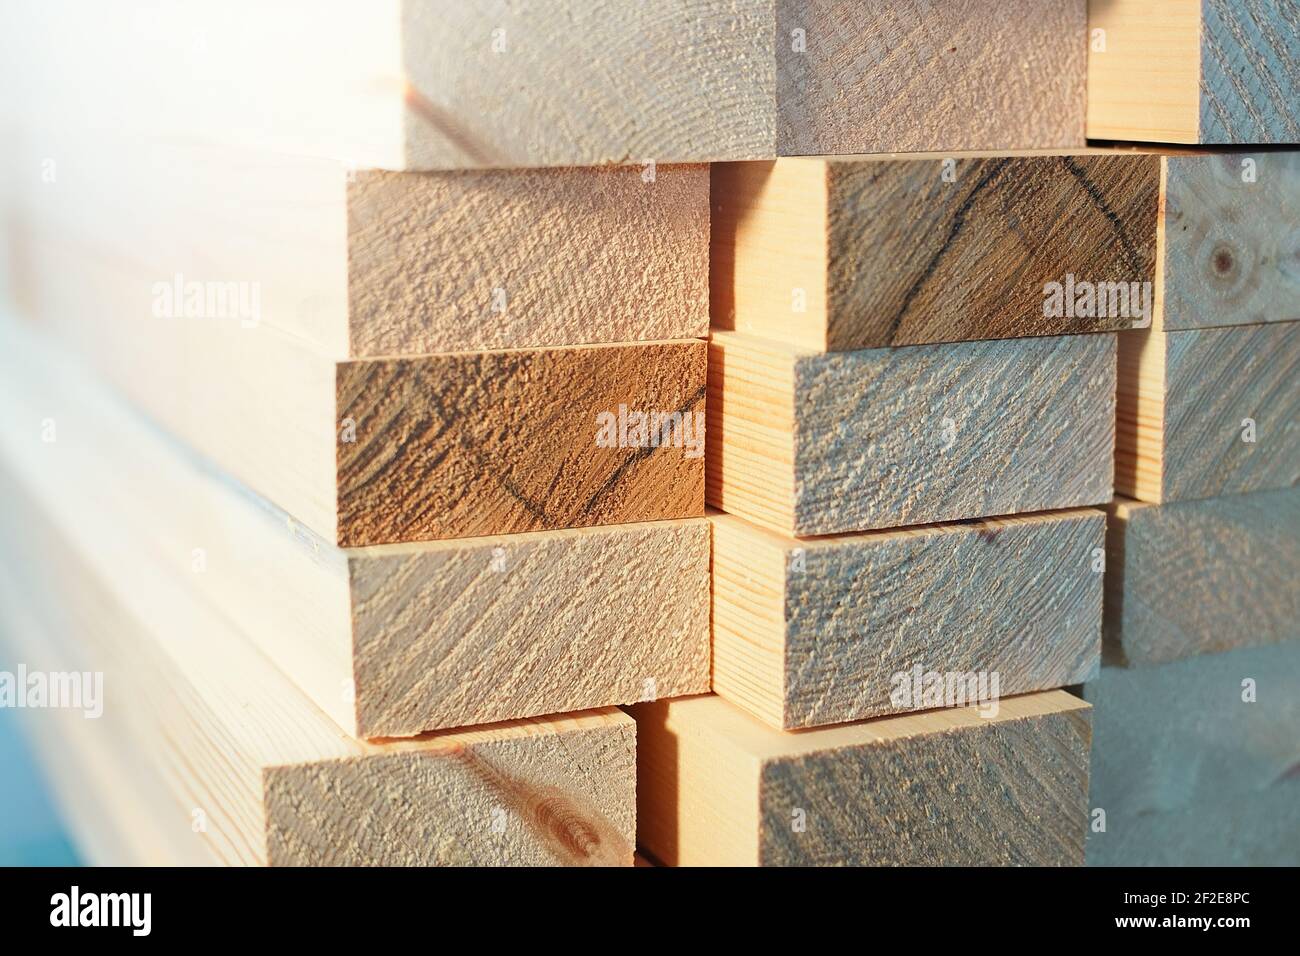 Clean wooden blocks are stacked. Industrial background for advertising building materials. Stock Photo